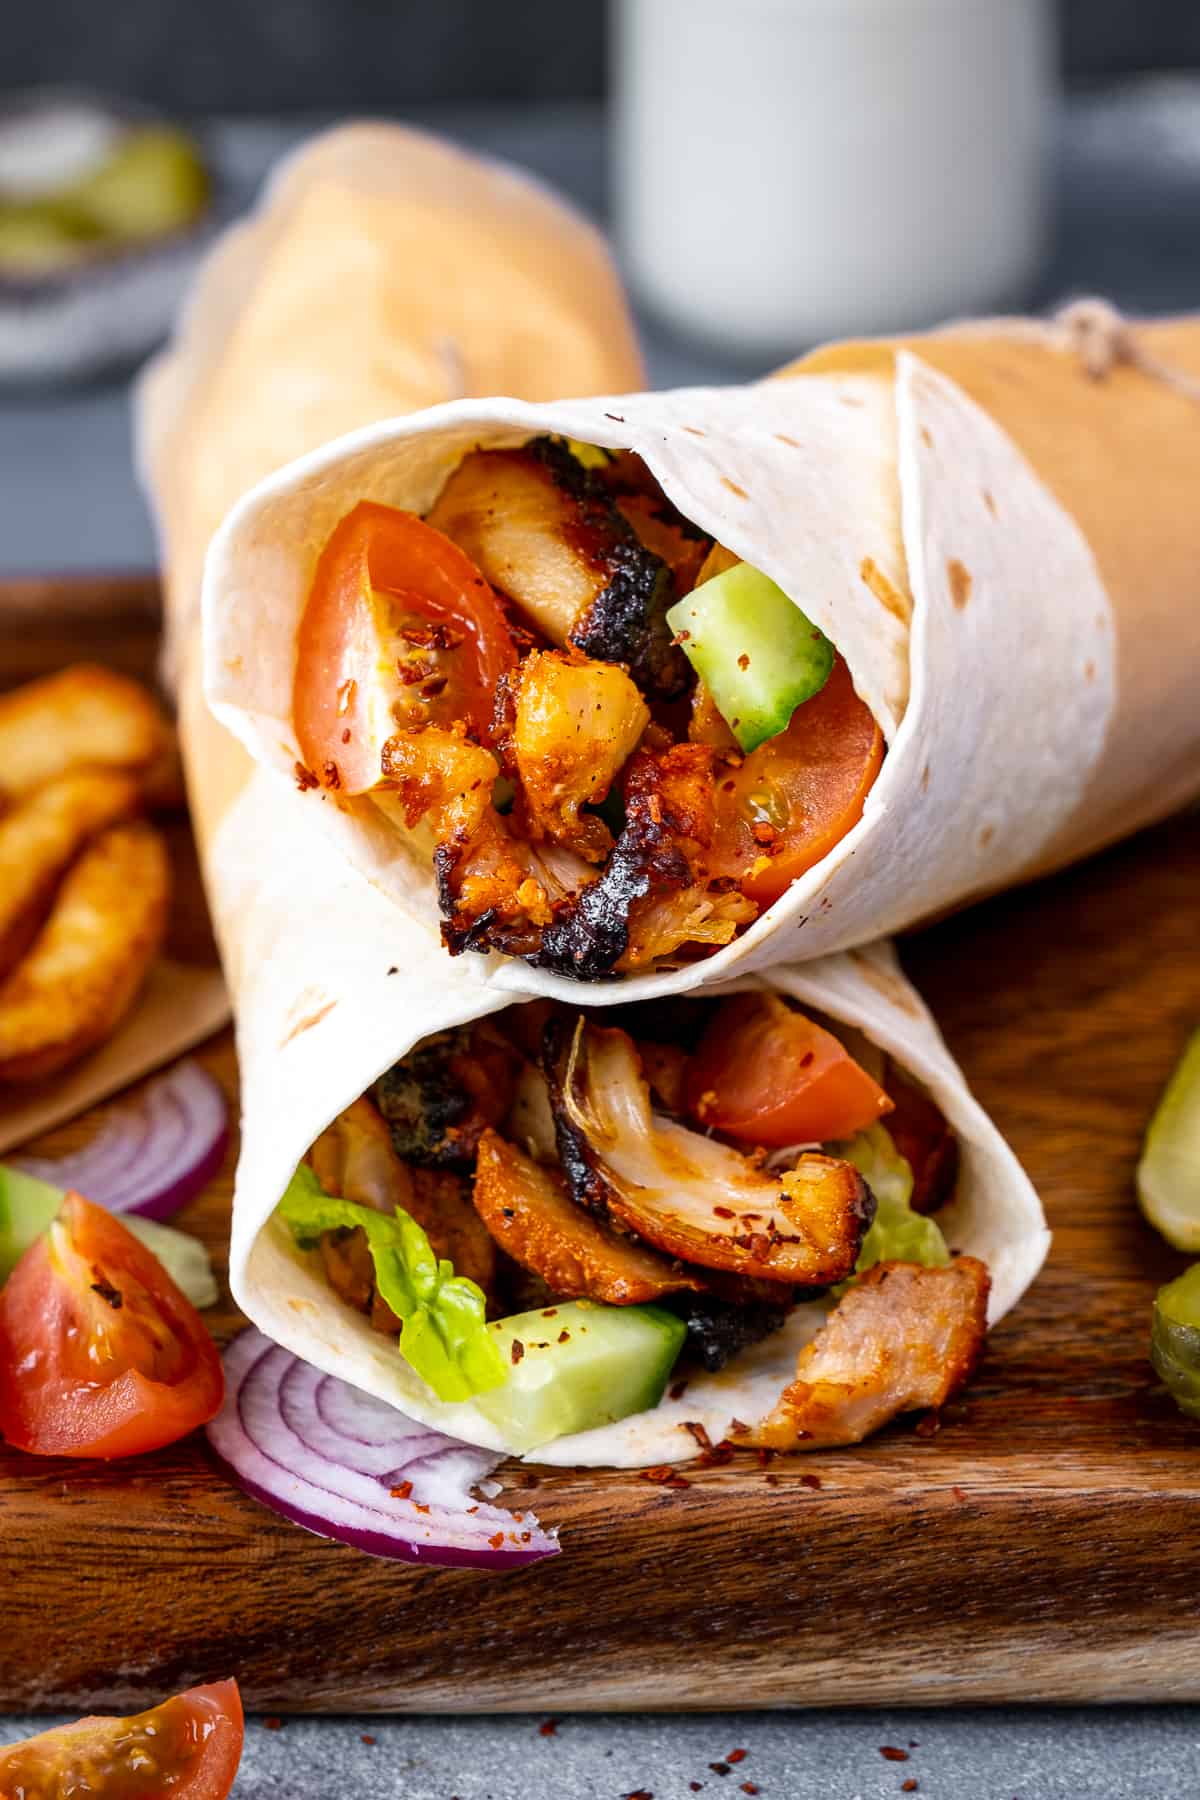 Chicken doner wraps with salad on a wooden board.